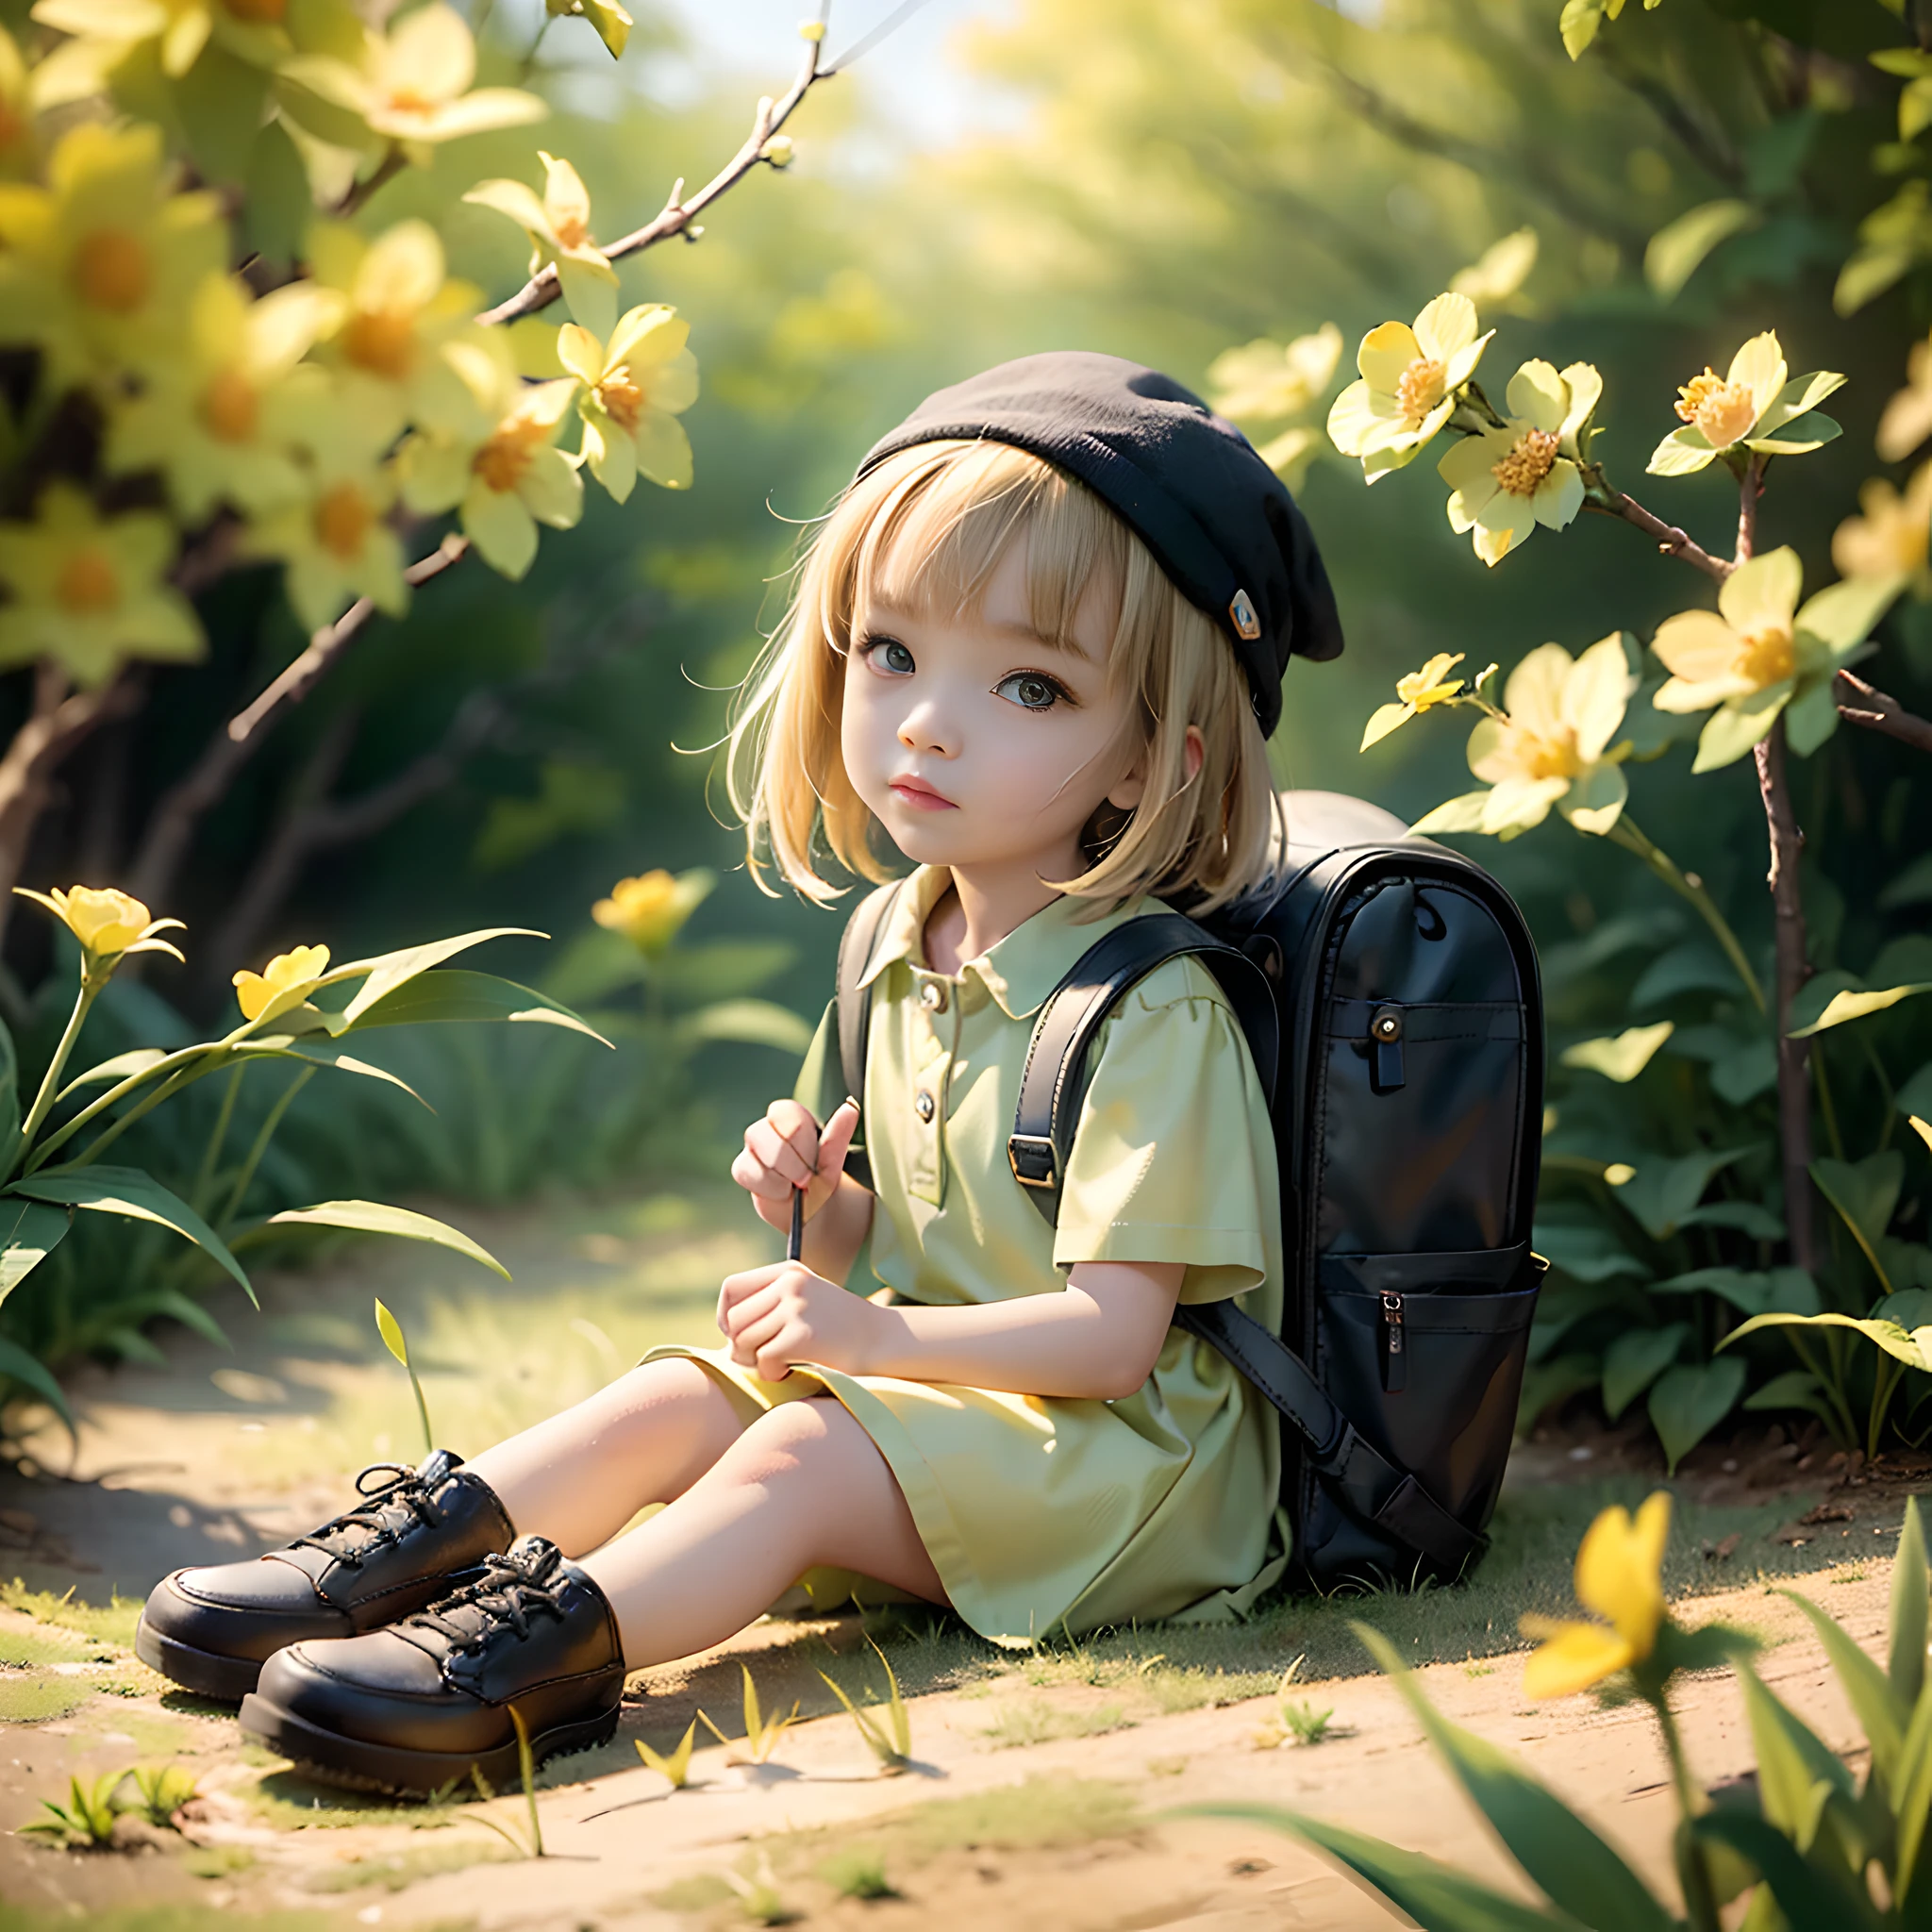 Tips: A very charming  with a backpack, cute little dog, enjoying a cute spring outing surrounded by beautiful yellow flowers and nature, this illustration is HD illustration in 4K resolution with very detailed facial features and cartoon style visuals, realistic, deep in the forest